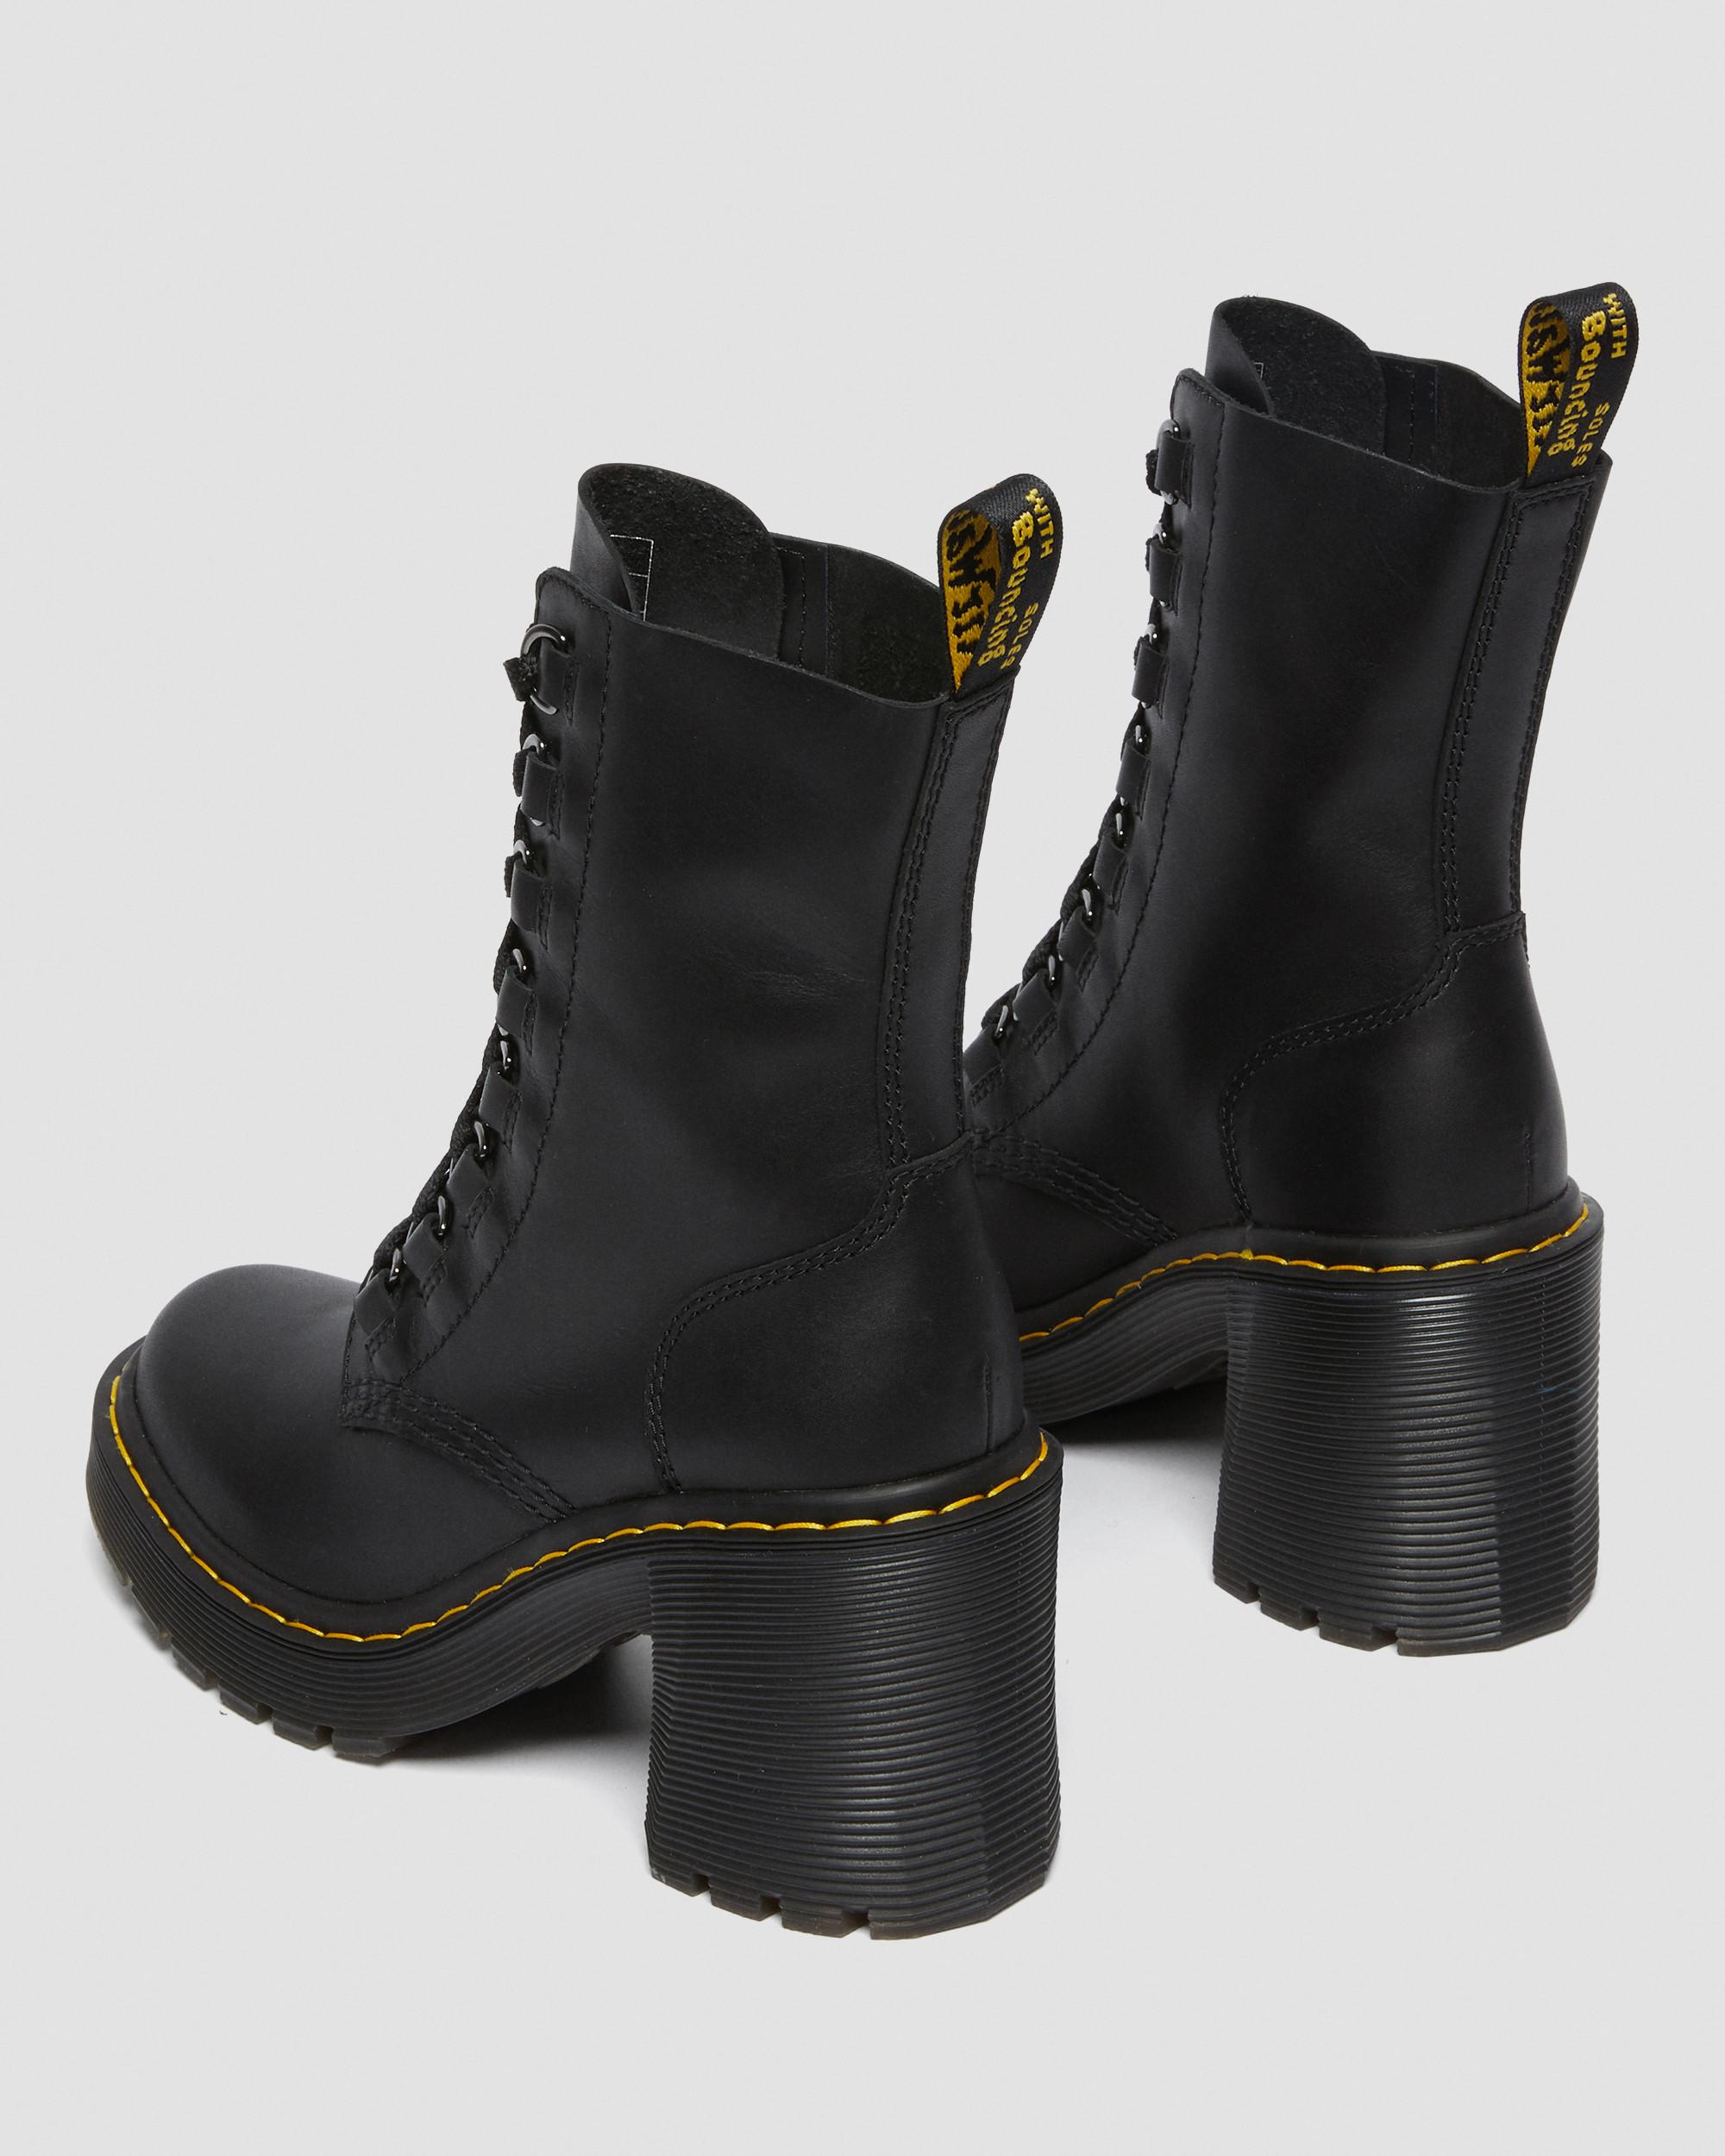 Chesney Leather Fla Heel Lace Up BootsChesney Leather Flared Heel Lace Up Boots Dr. Martens